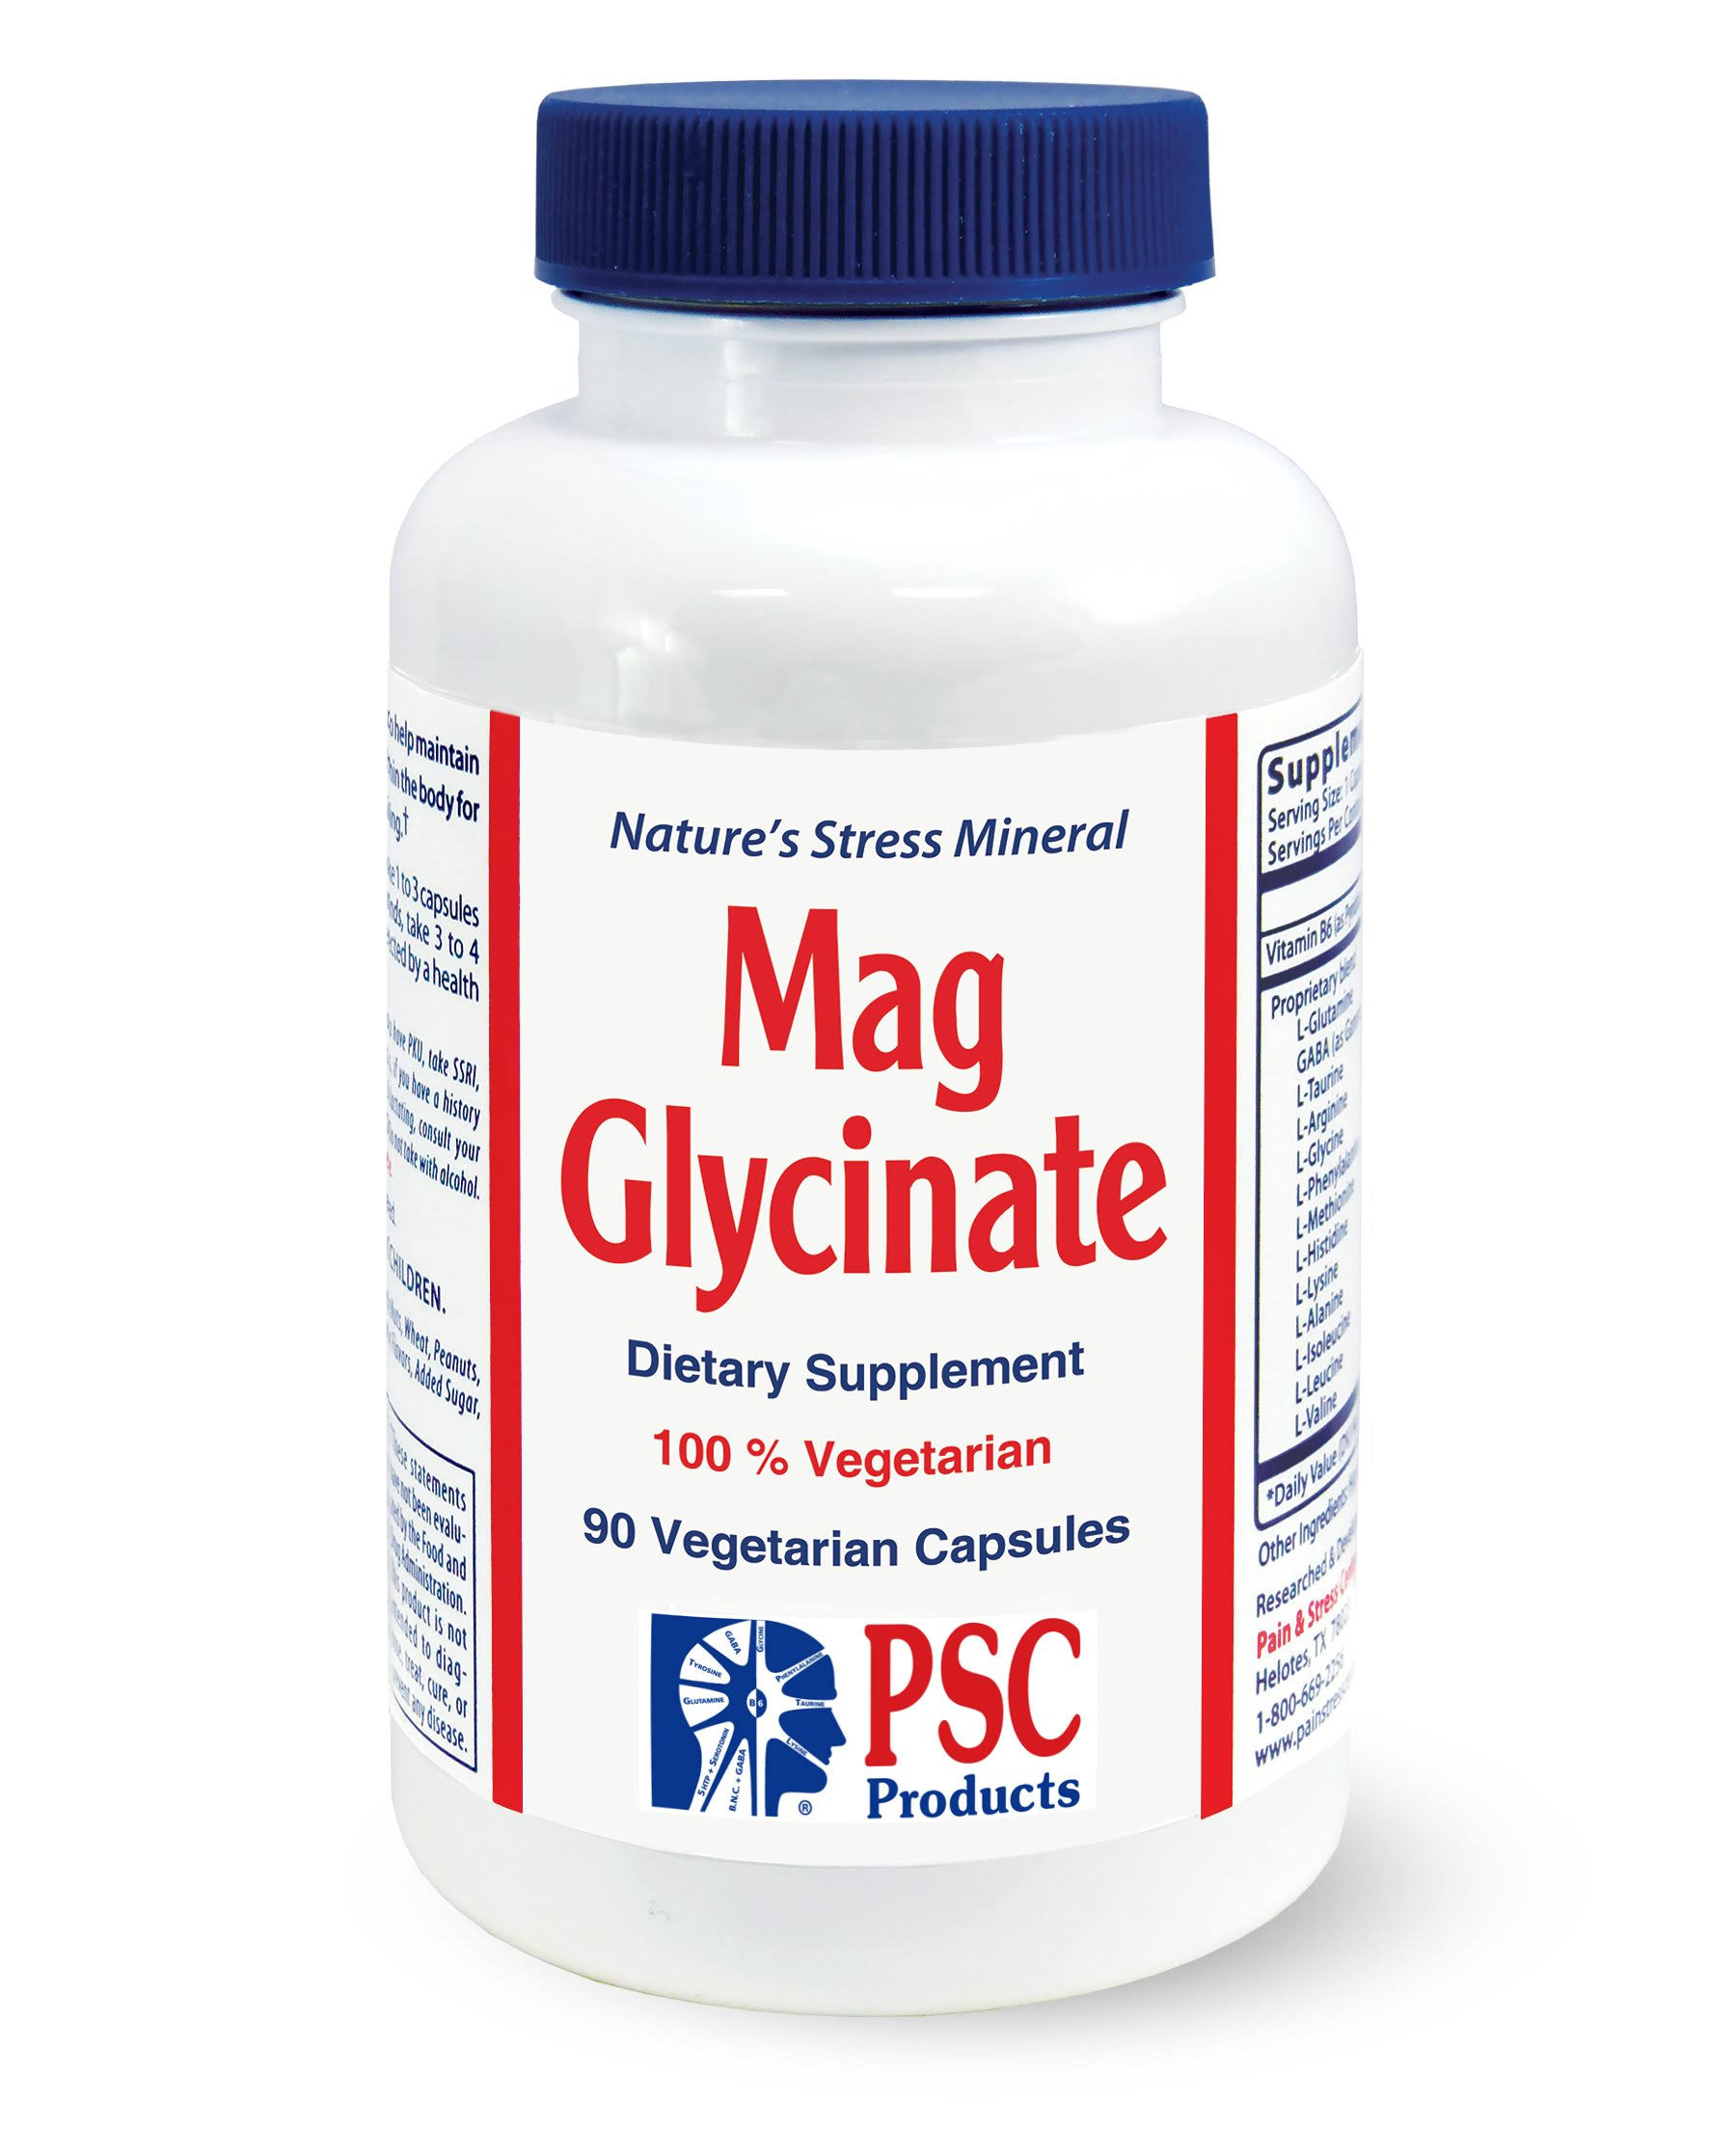 Mag Glycinate - Magnesium Glycinate 120 MG - Nature's Stress Mineral